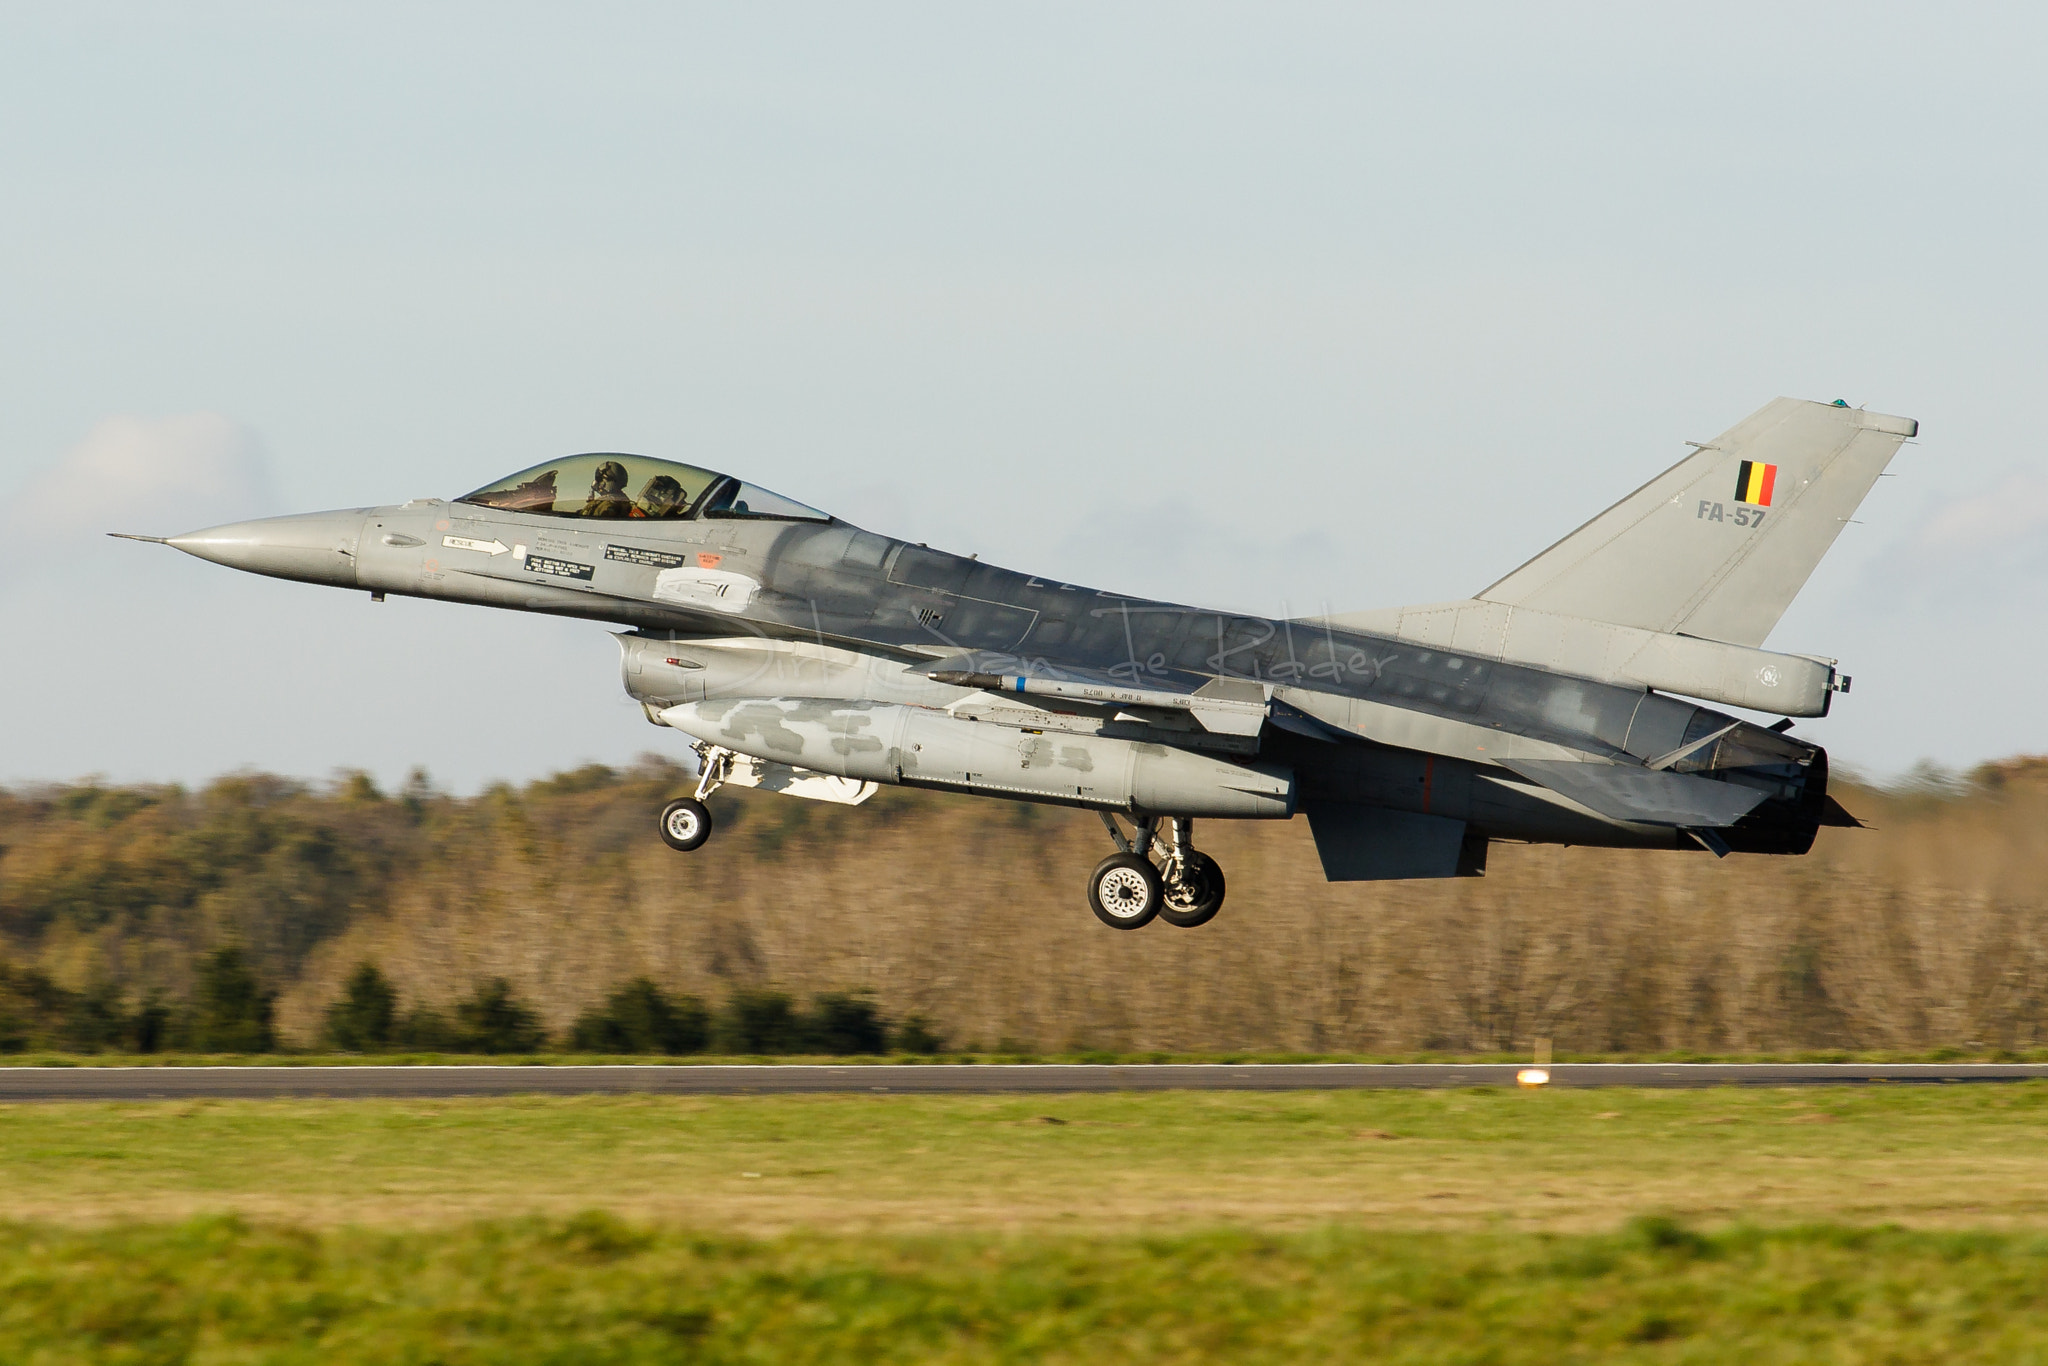 Canon EOS 20D sample photo. Belgian air force f-16am fighting falcon fa-57 photography